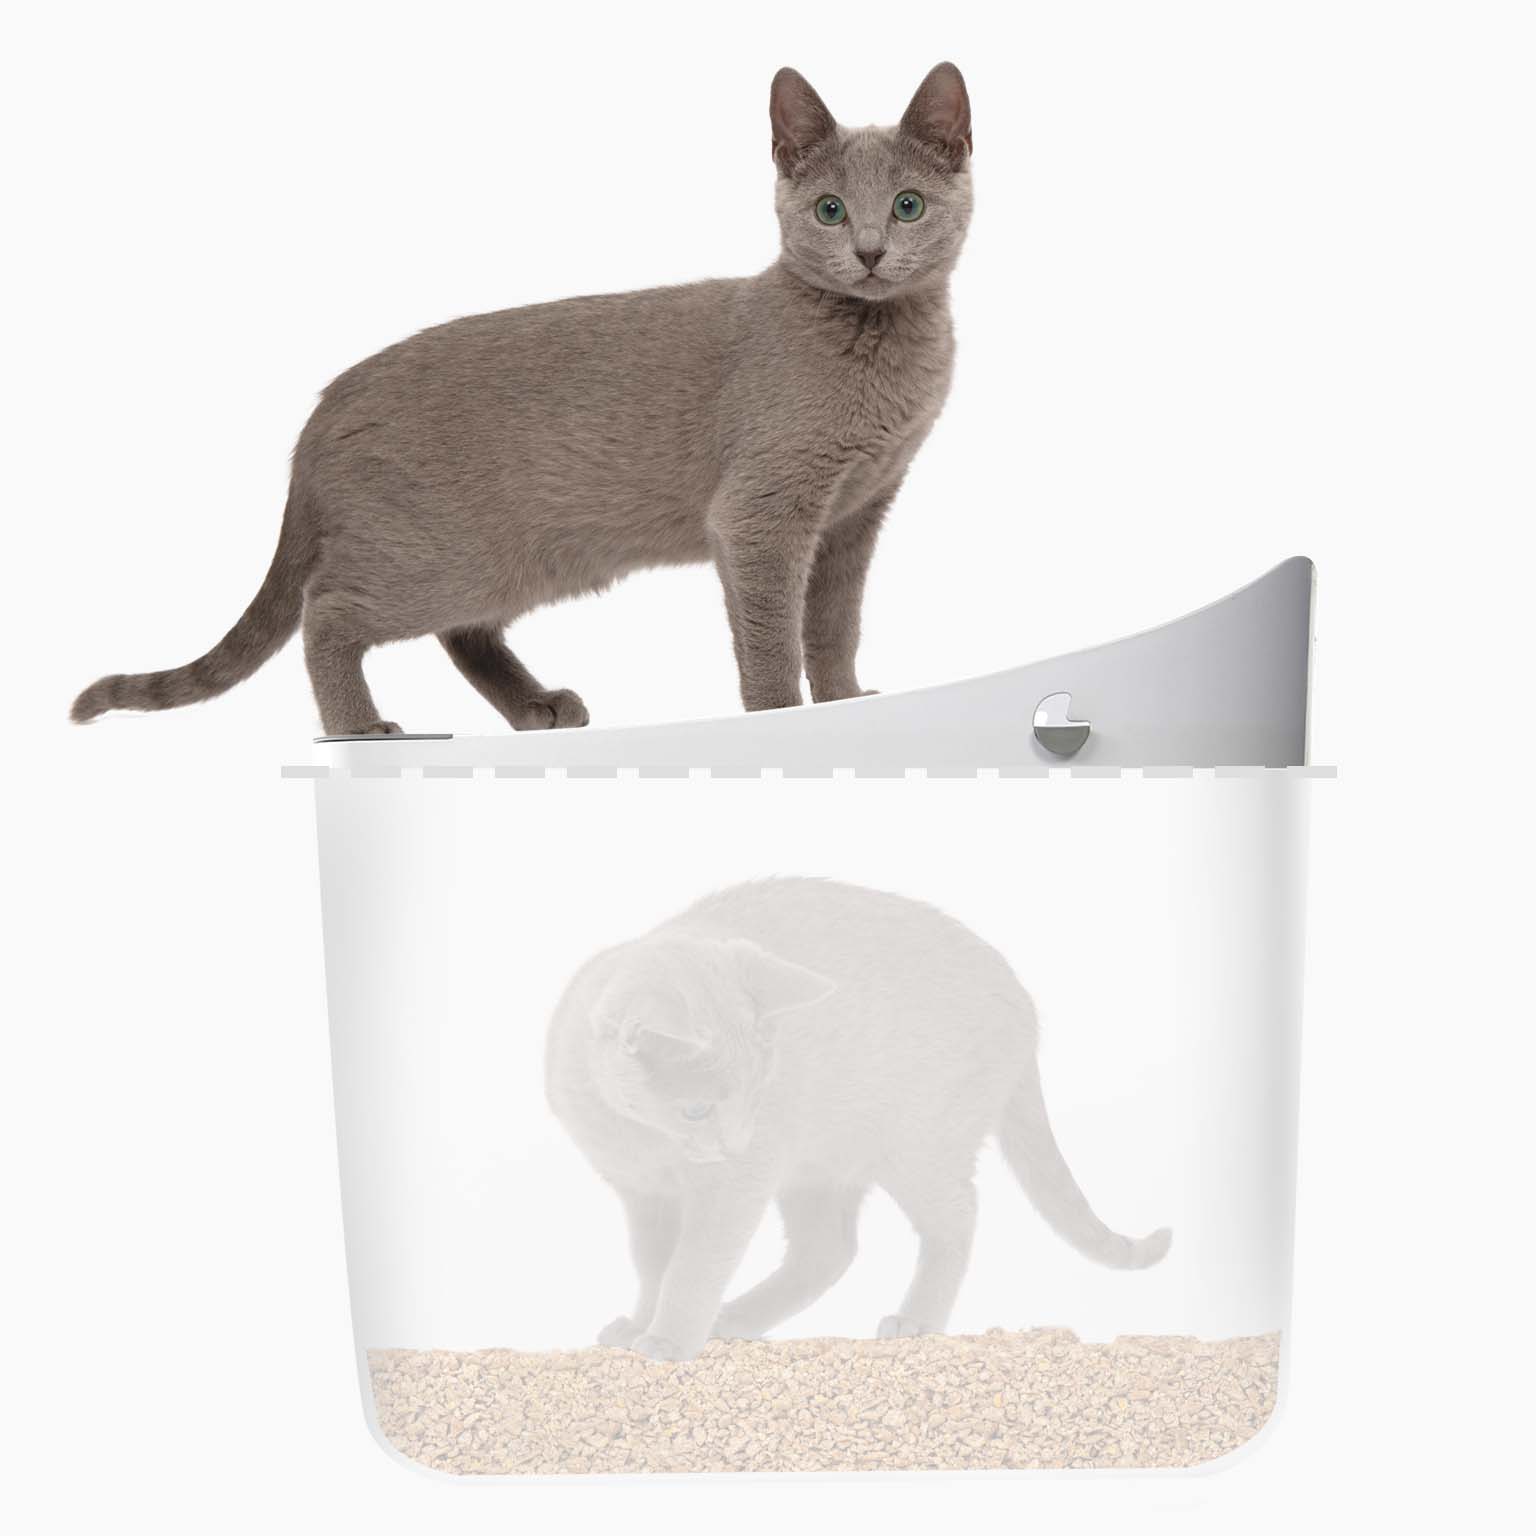 Cat in and on top PIXI litter box